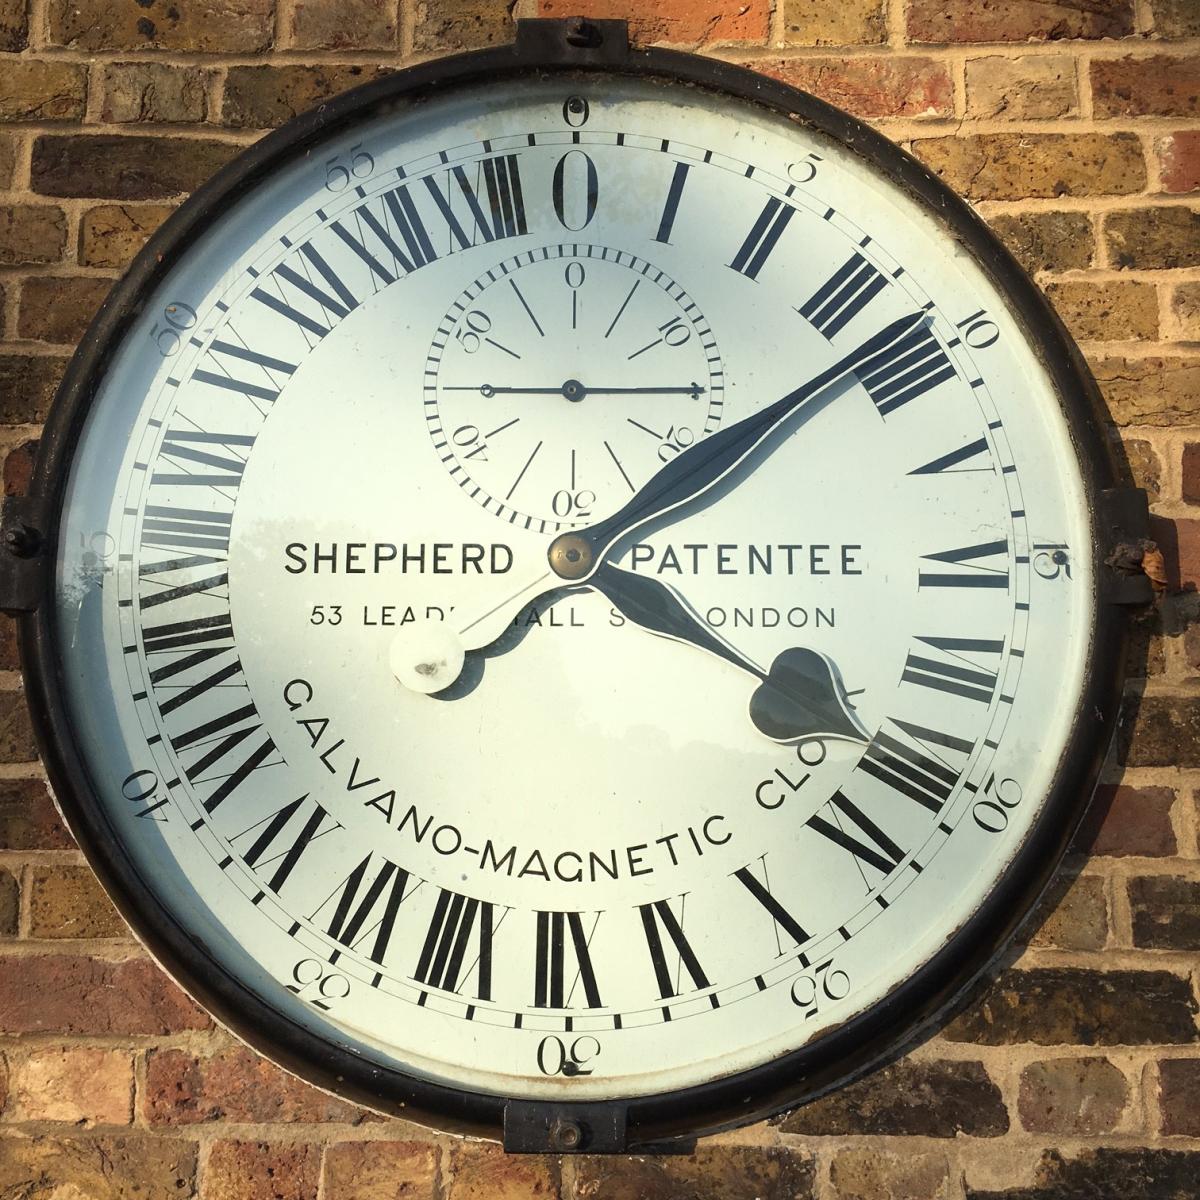 A clock with 24 hours displayed on the face, installed outside the Royal Observatory Greenwich